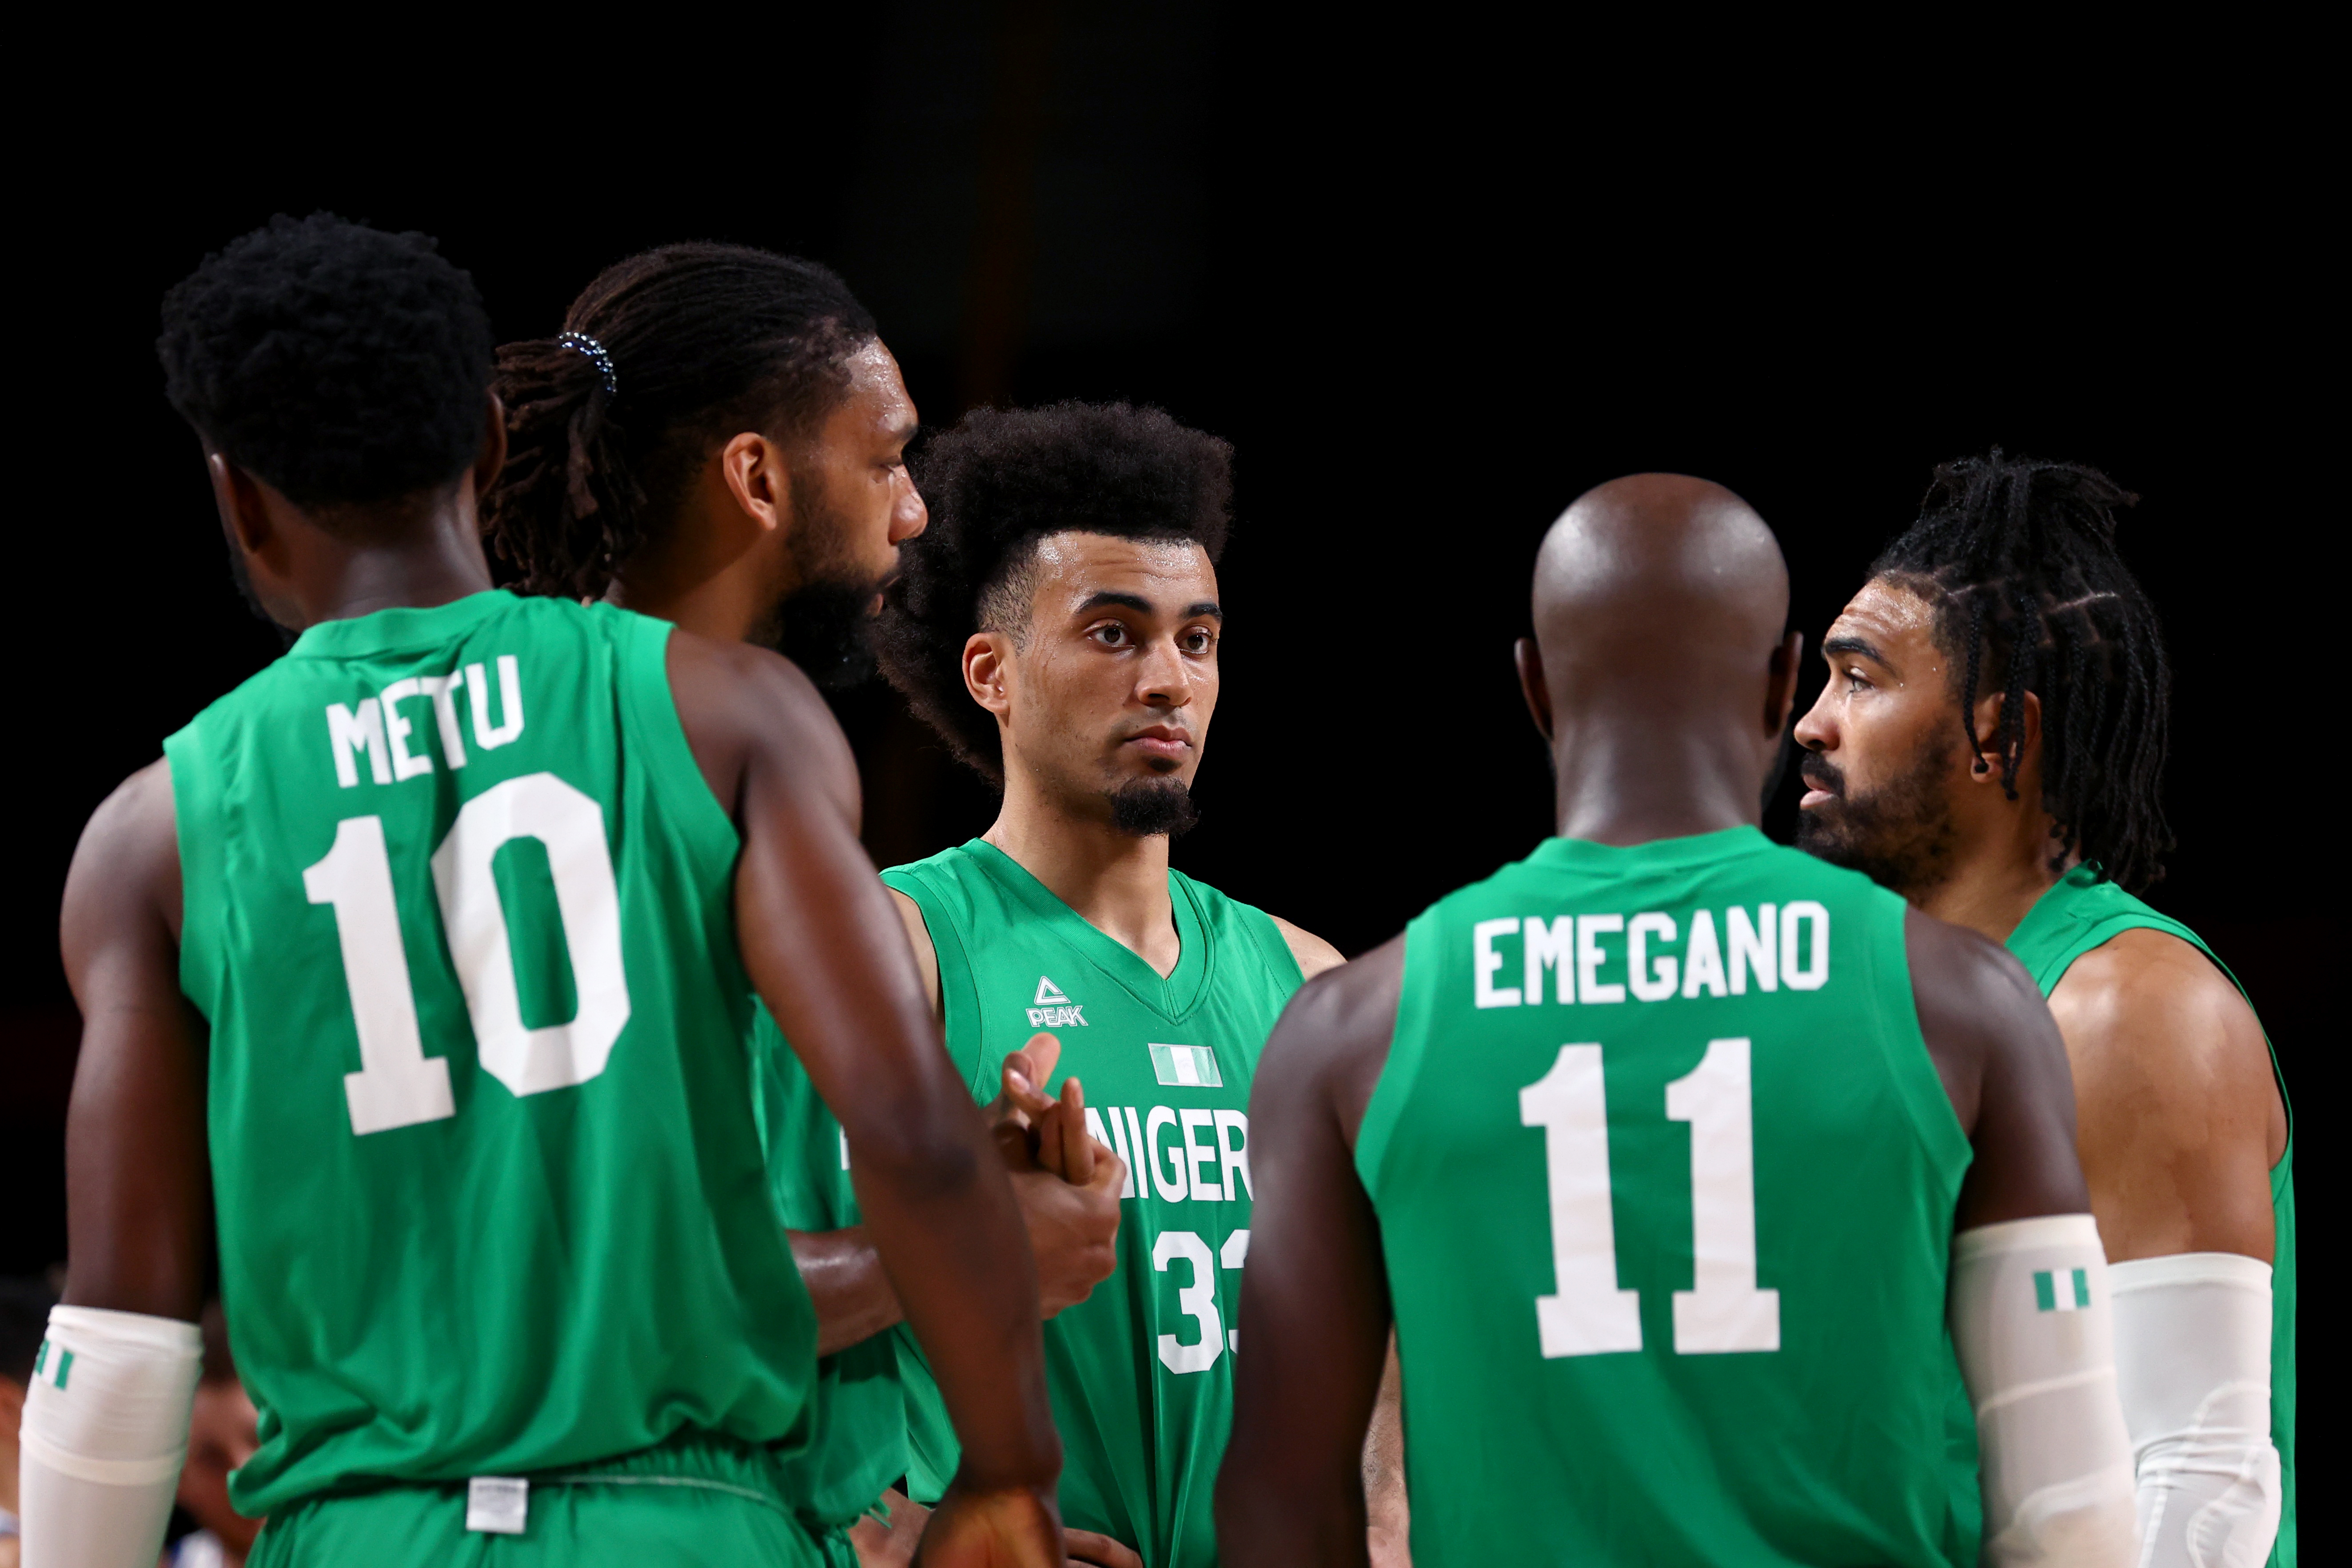 Nigerian President Buhari withdraws basketball teams from international competition